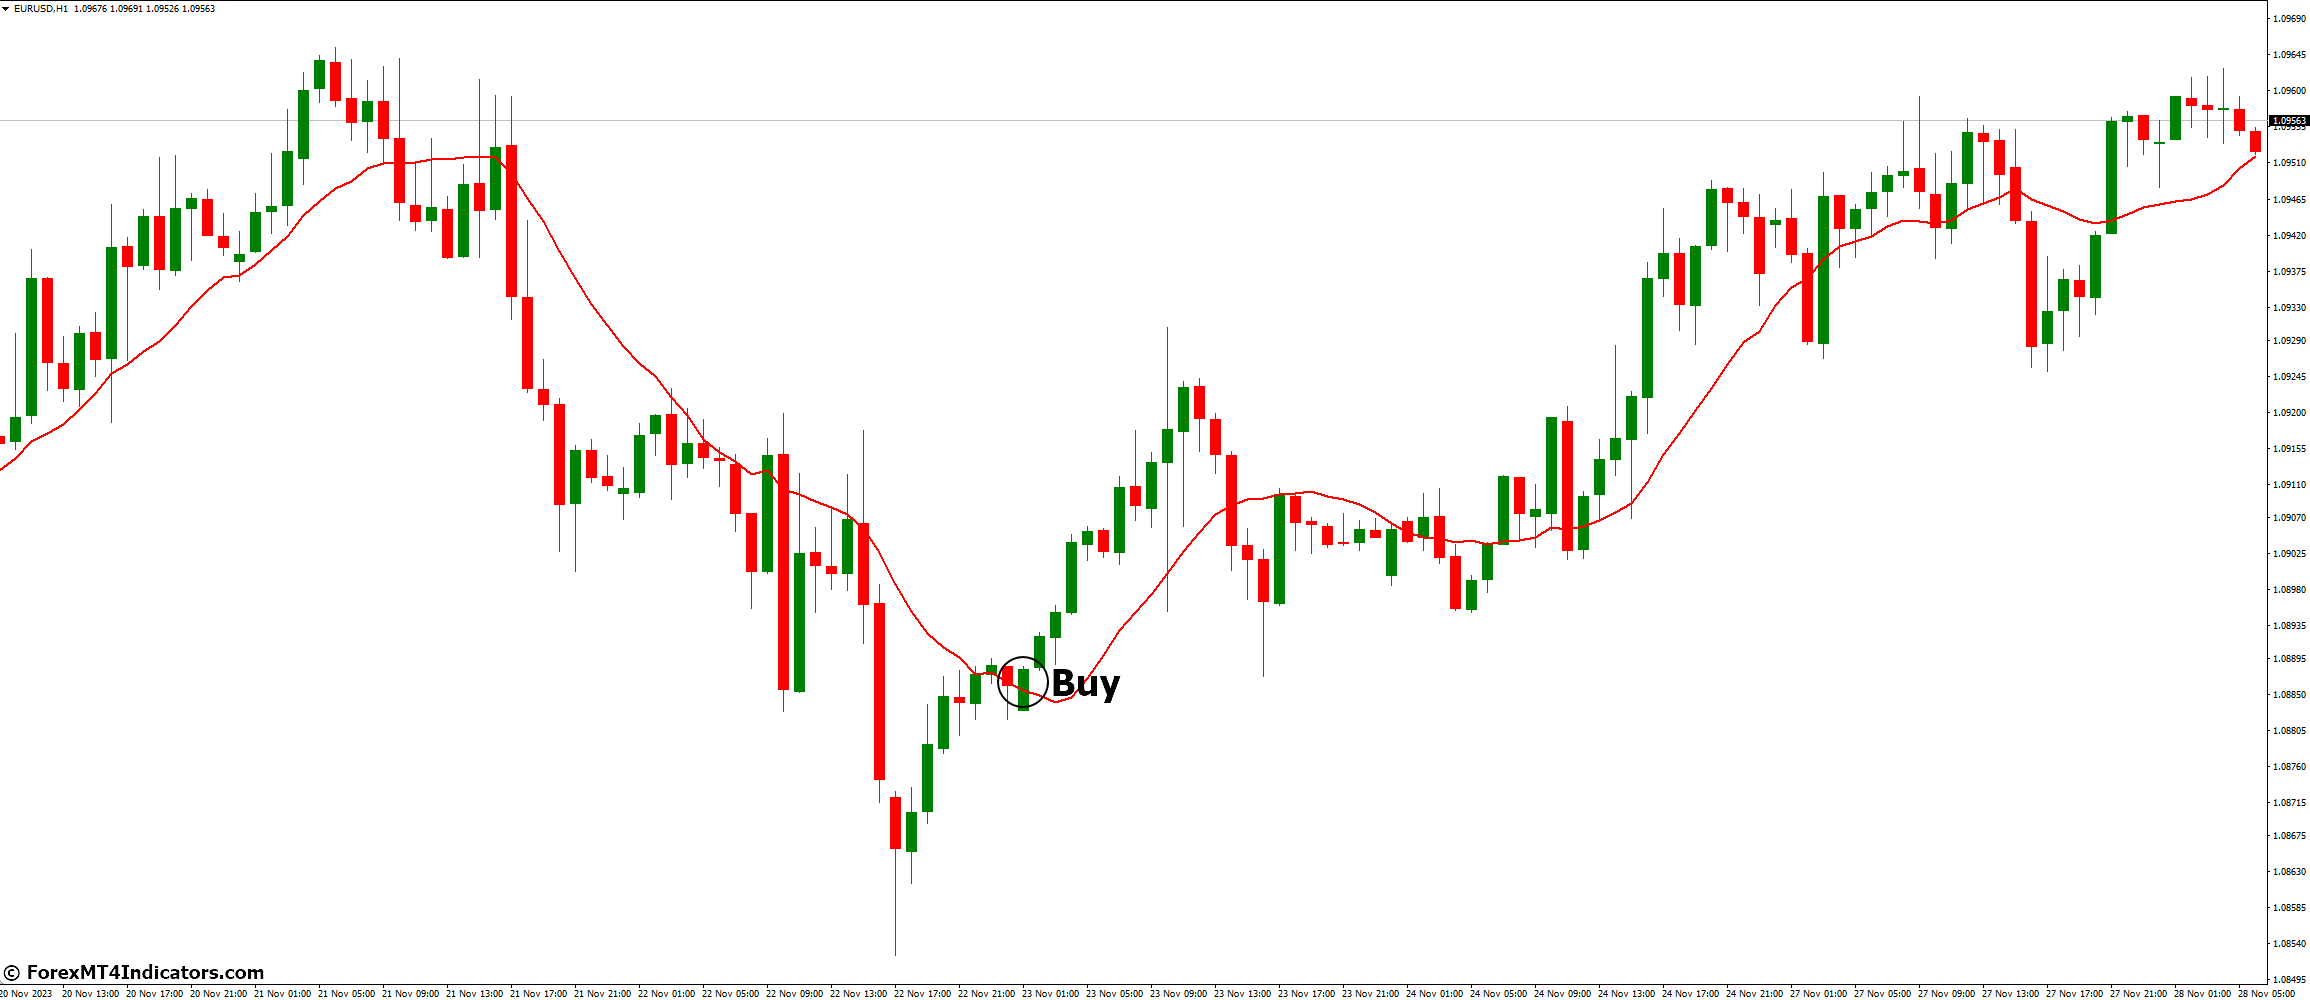 How to Trade with Moving Average Indicator - Buy Entry